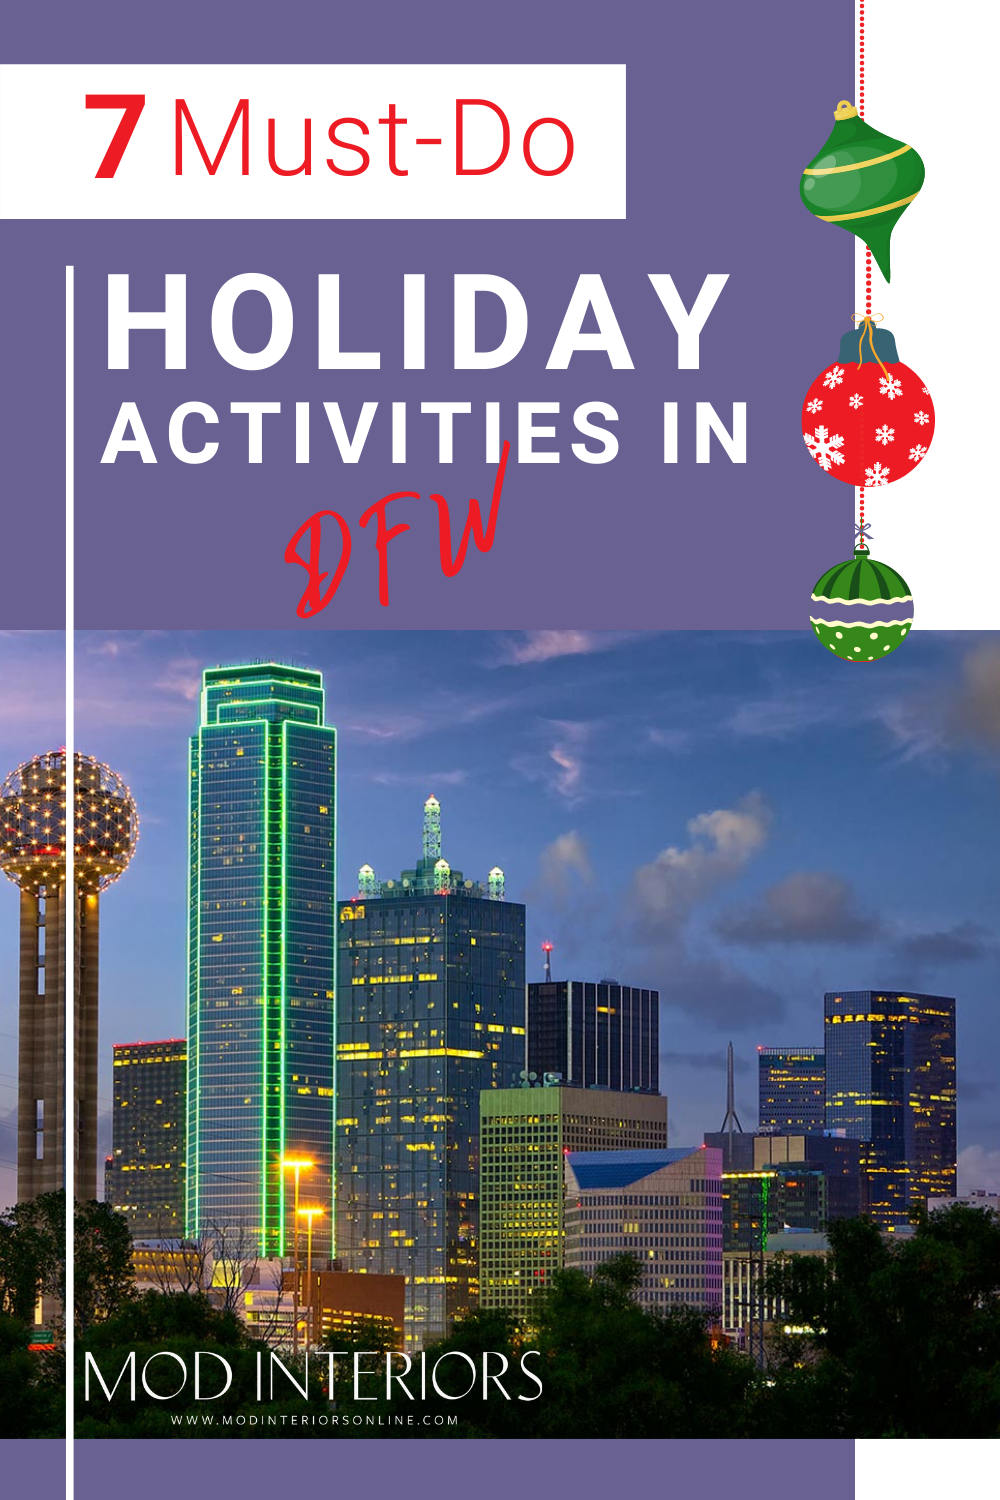 7-must-do-holiday-activiteis-DFW